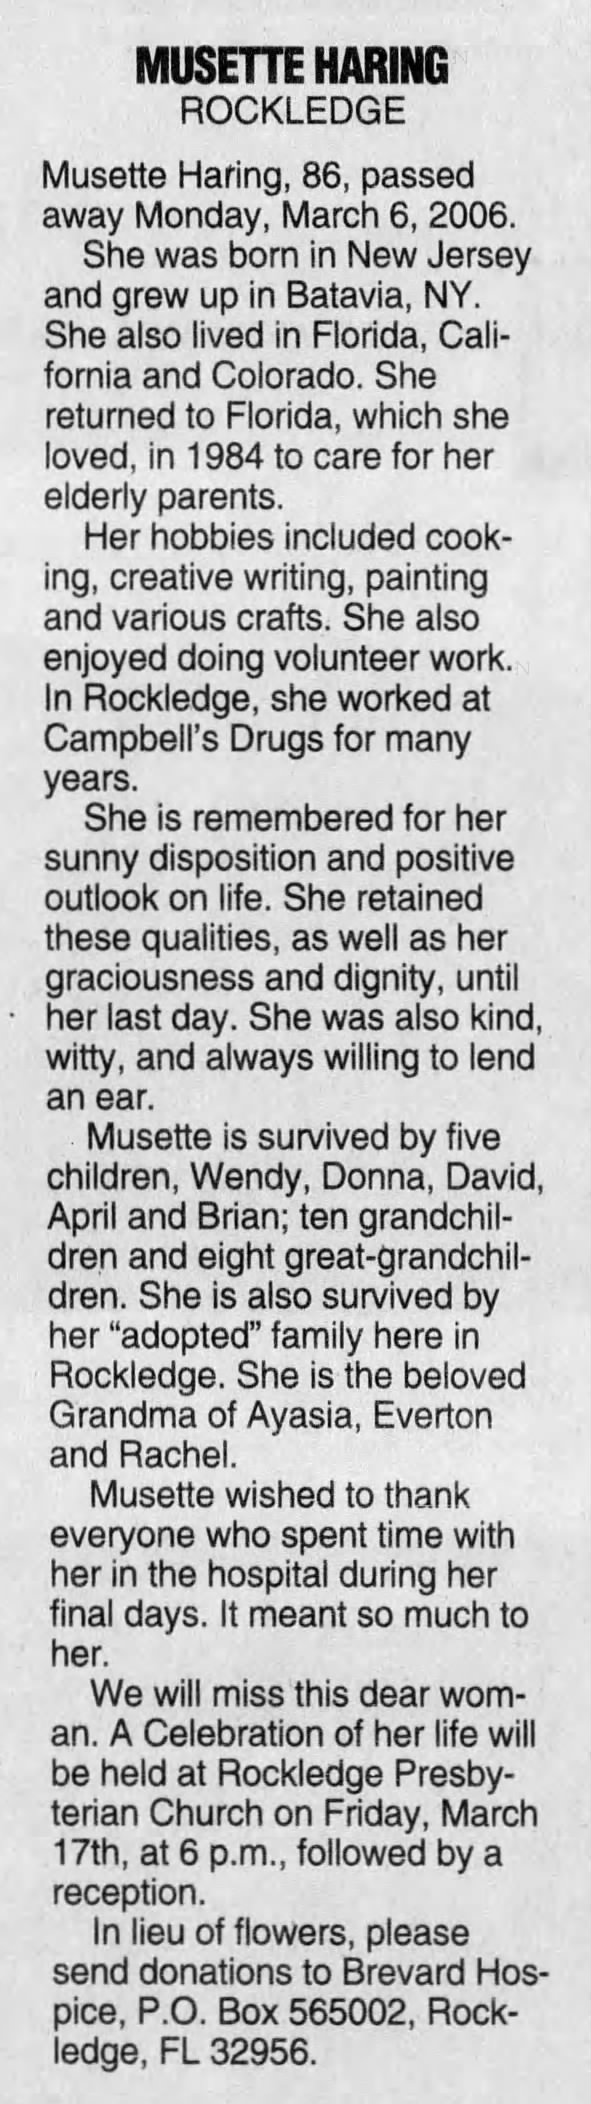 Musette Haring - Florida Today - Cocoa, Florida - Sunday, March 12, 2006 - Page 8B - Column 3